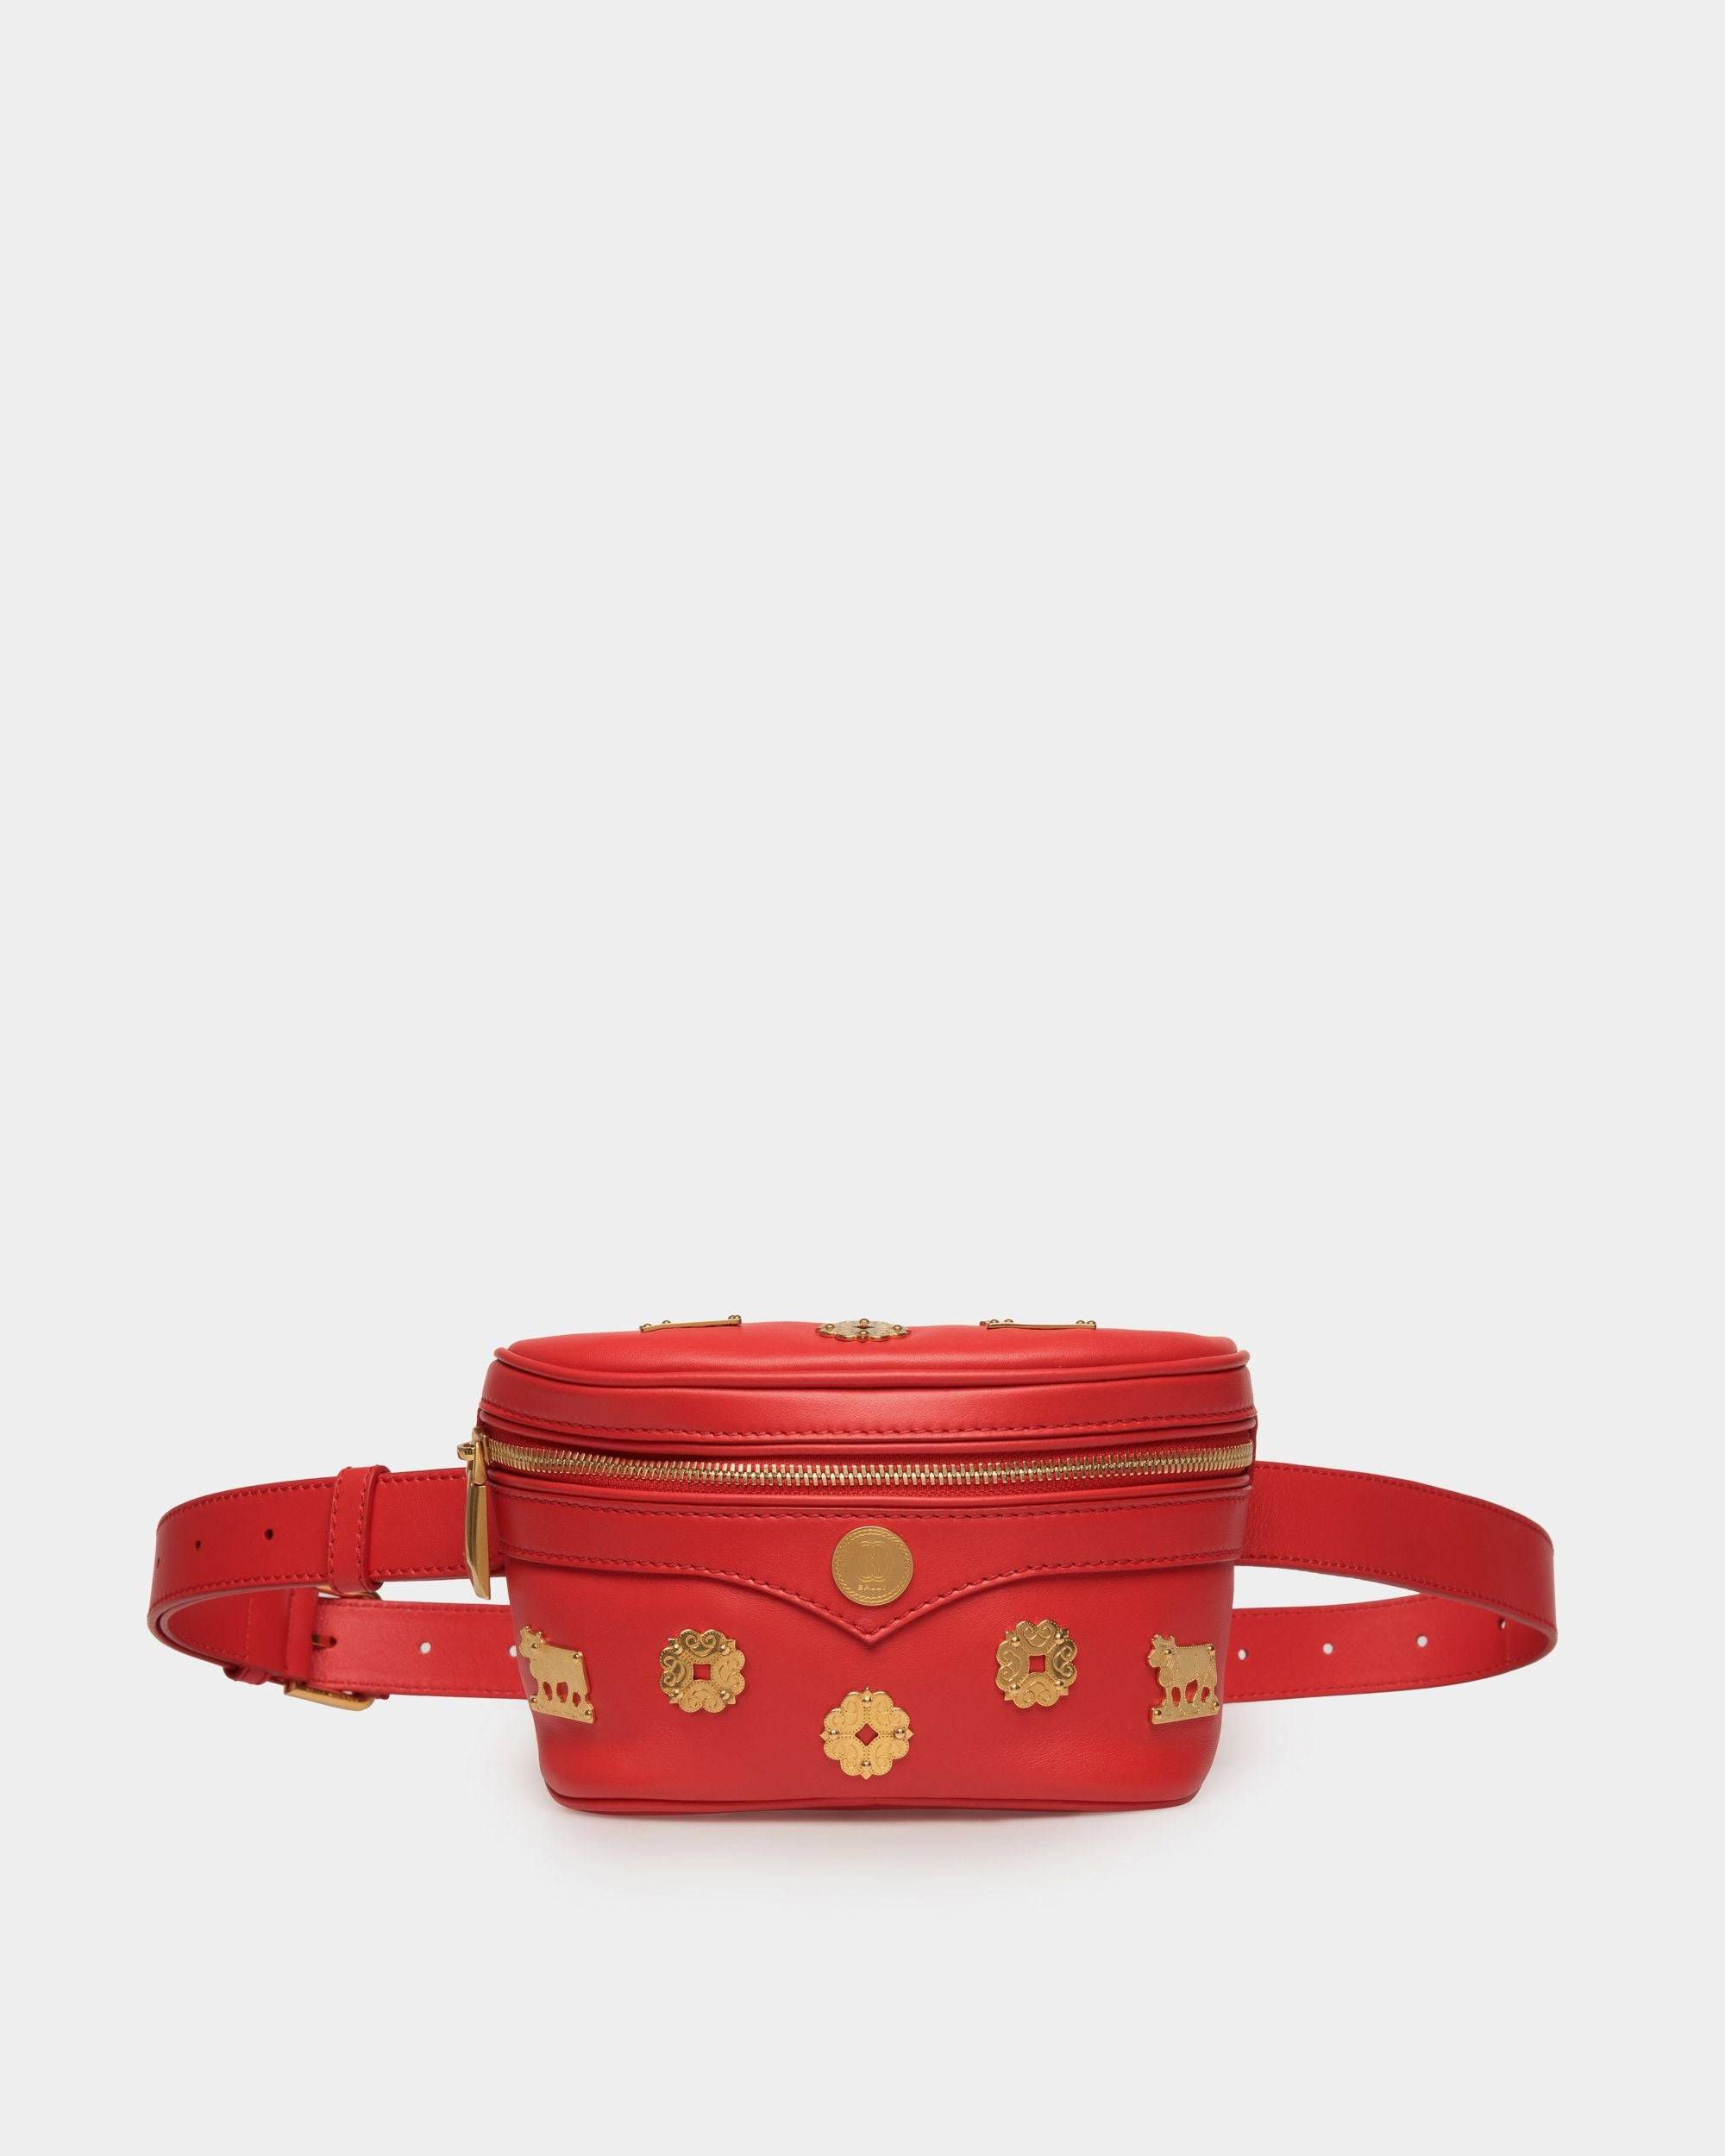 Women's Moutain Belt Bag  in Red Leather | Bally | Still Life Front